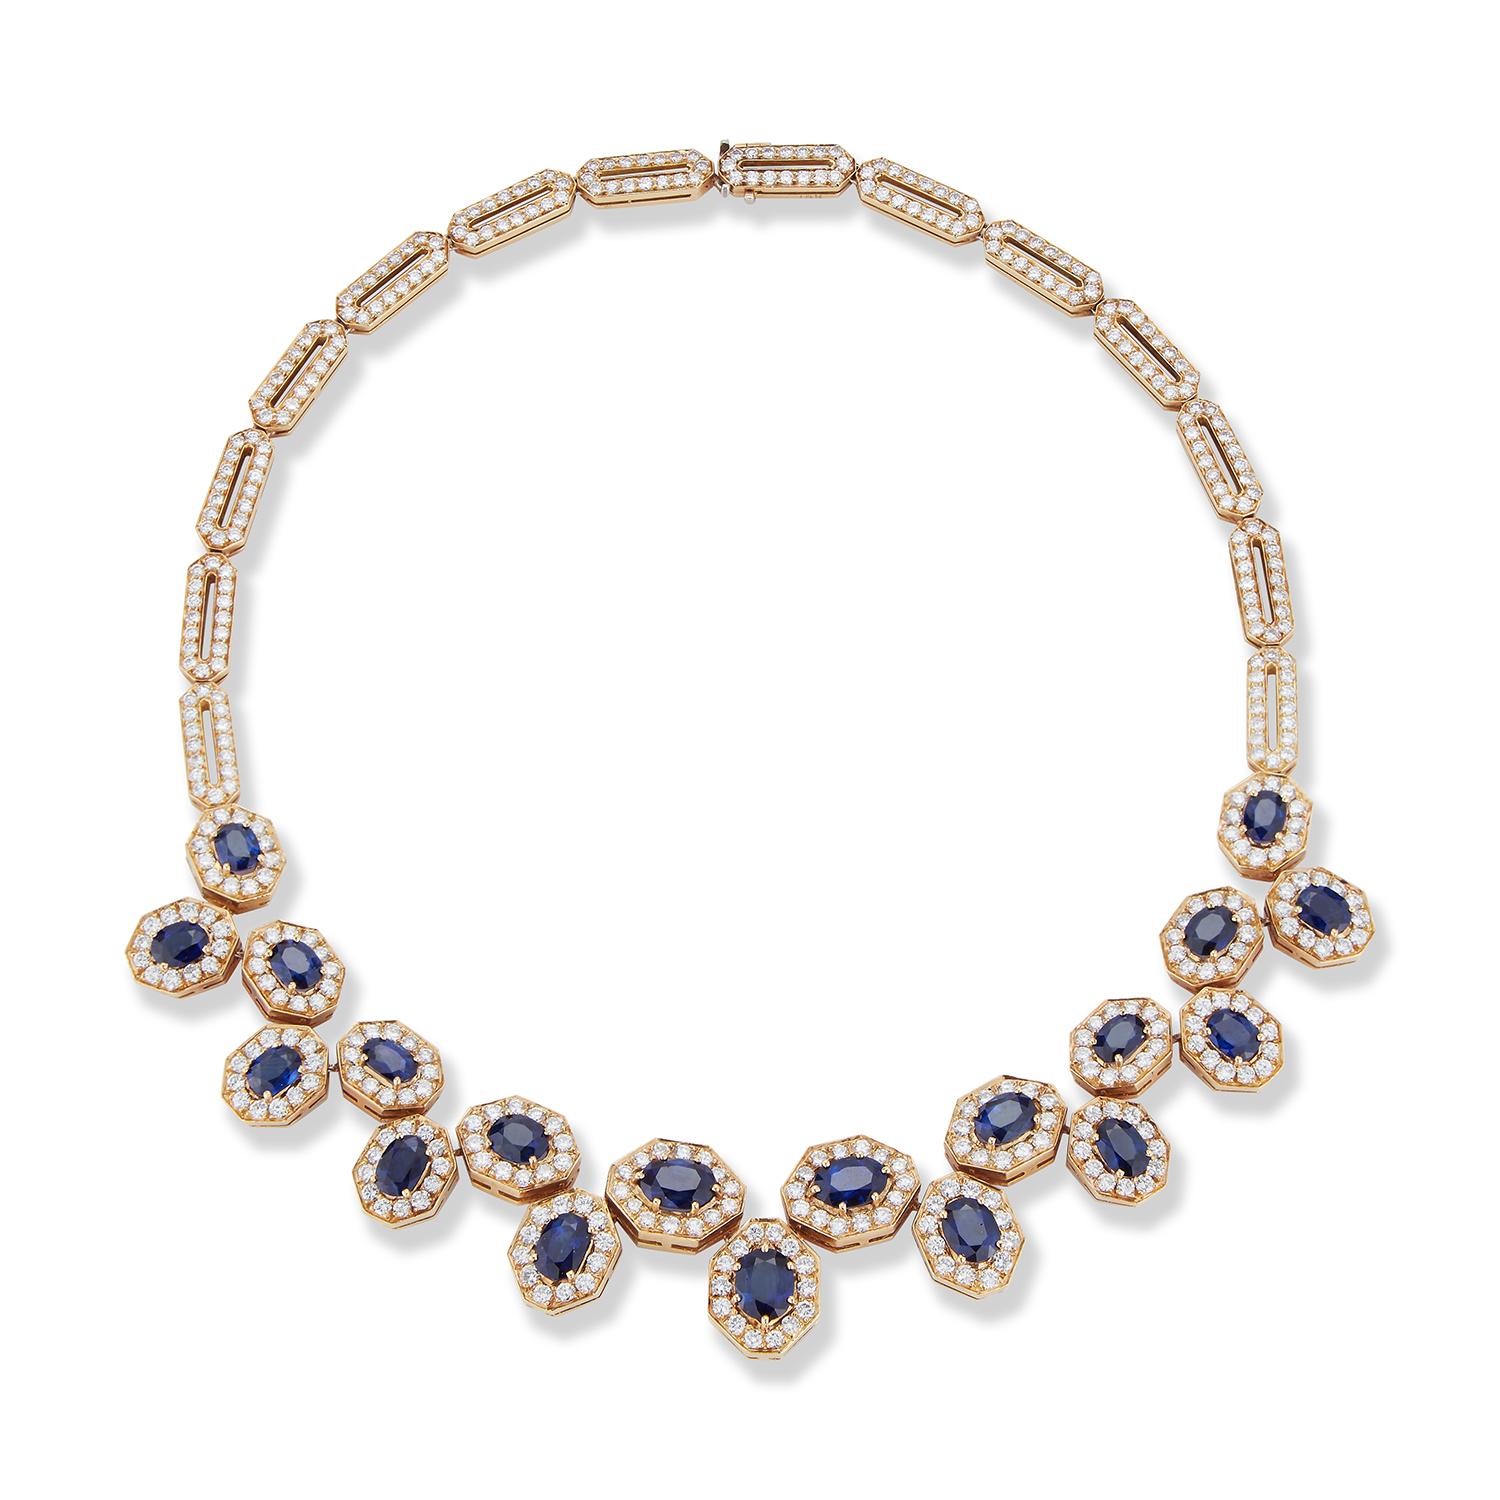 AGL Certified Sapphire & Diamond Necklace,

Set with 19 oval cut sapphires weighing approximately 15 carats & 458 round cut diamonds weighing approximately 11.40 carats
With a certificate from AGL laboratories stating the sapphires are of Ceylon and